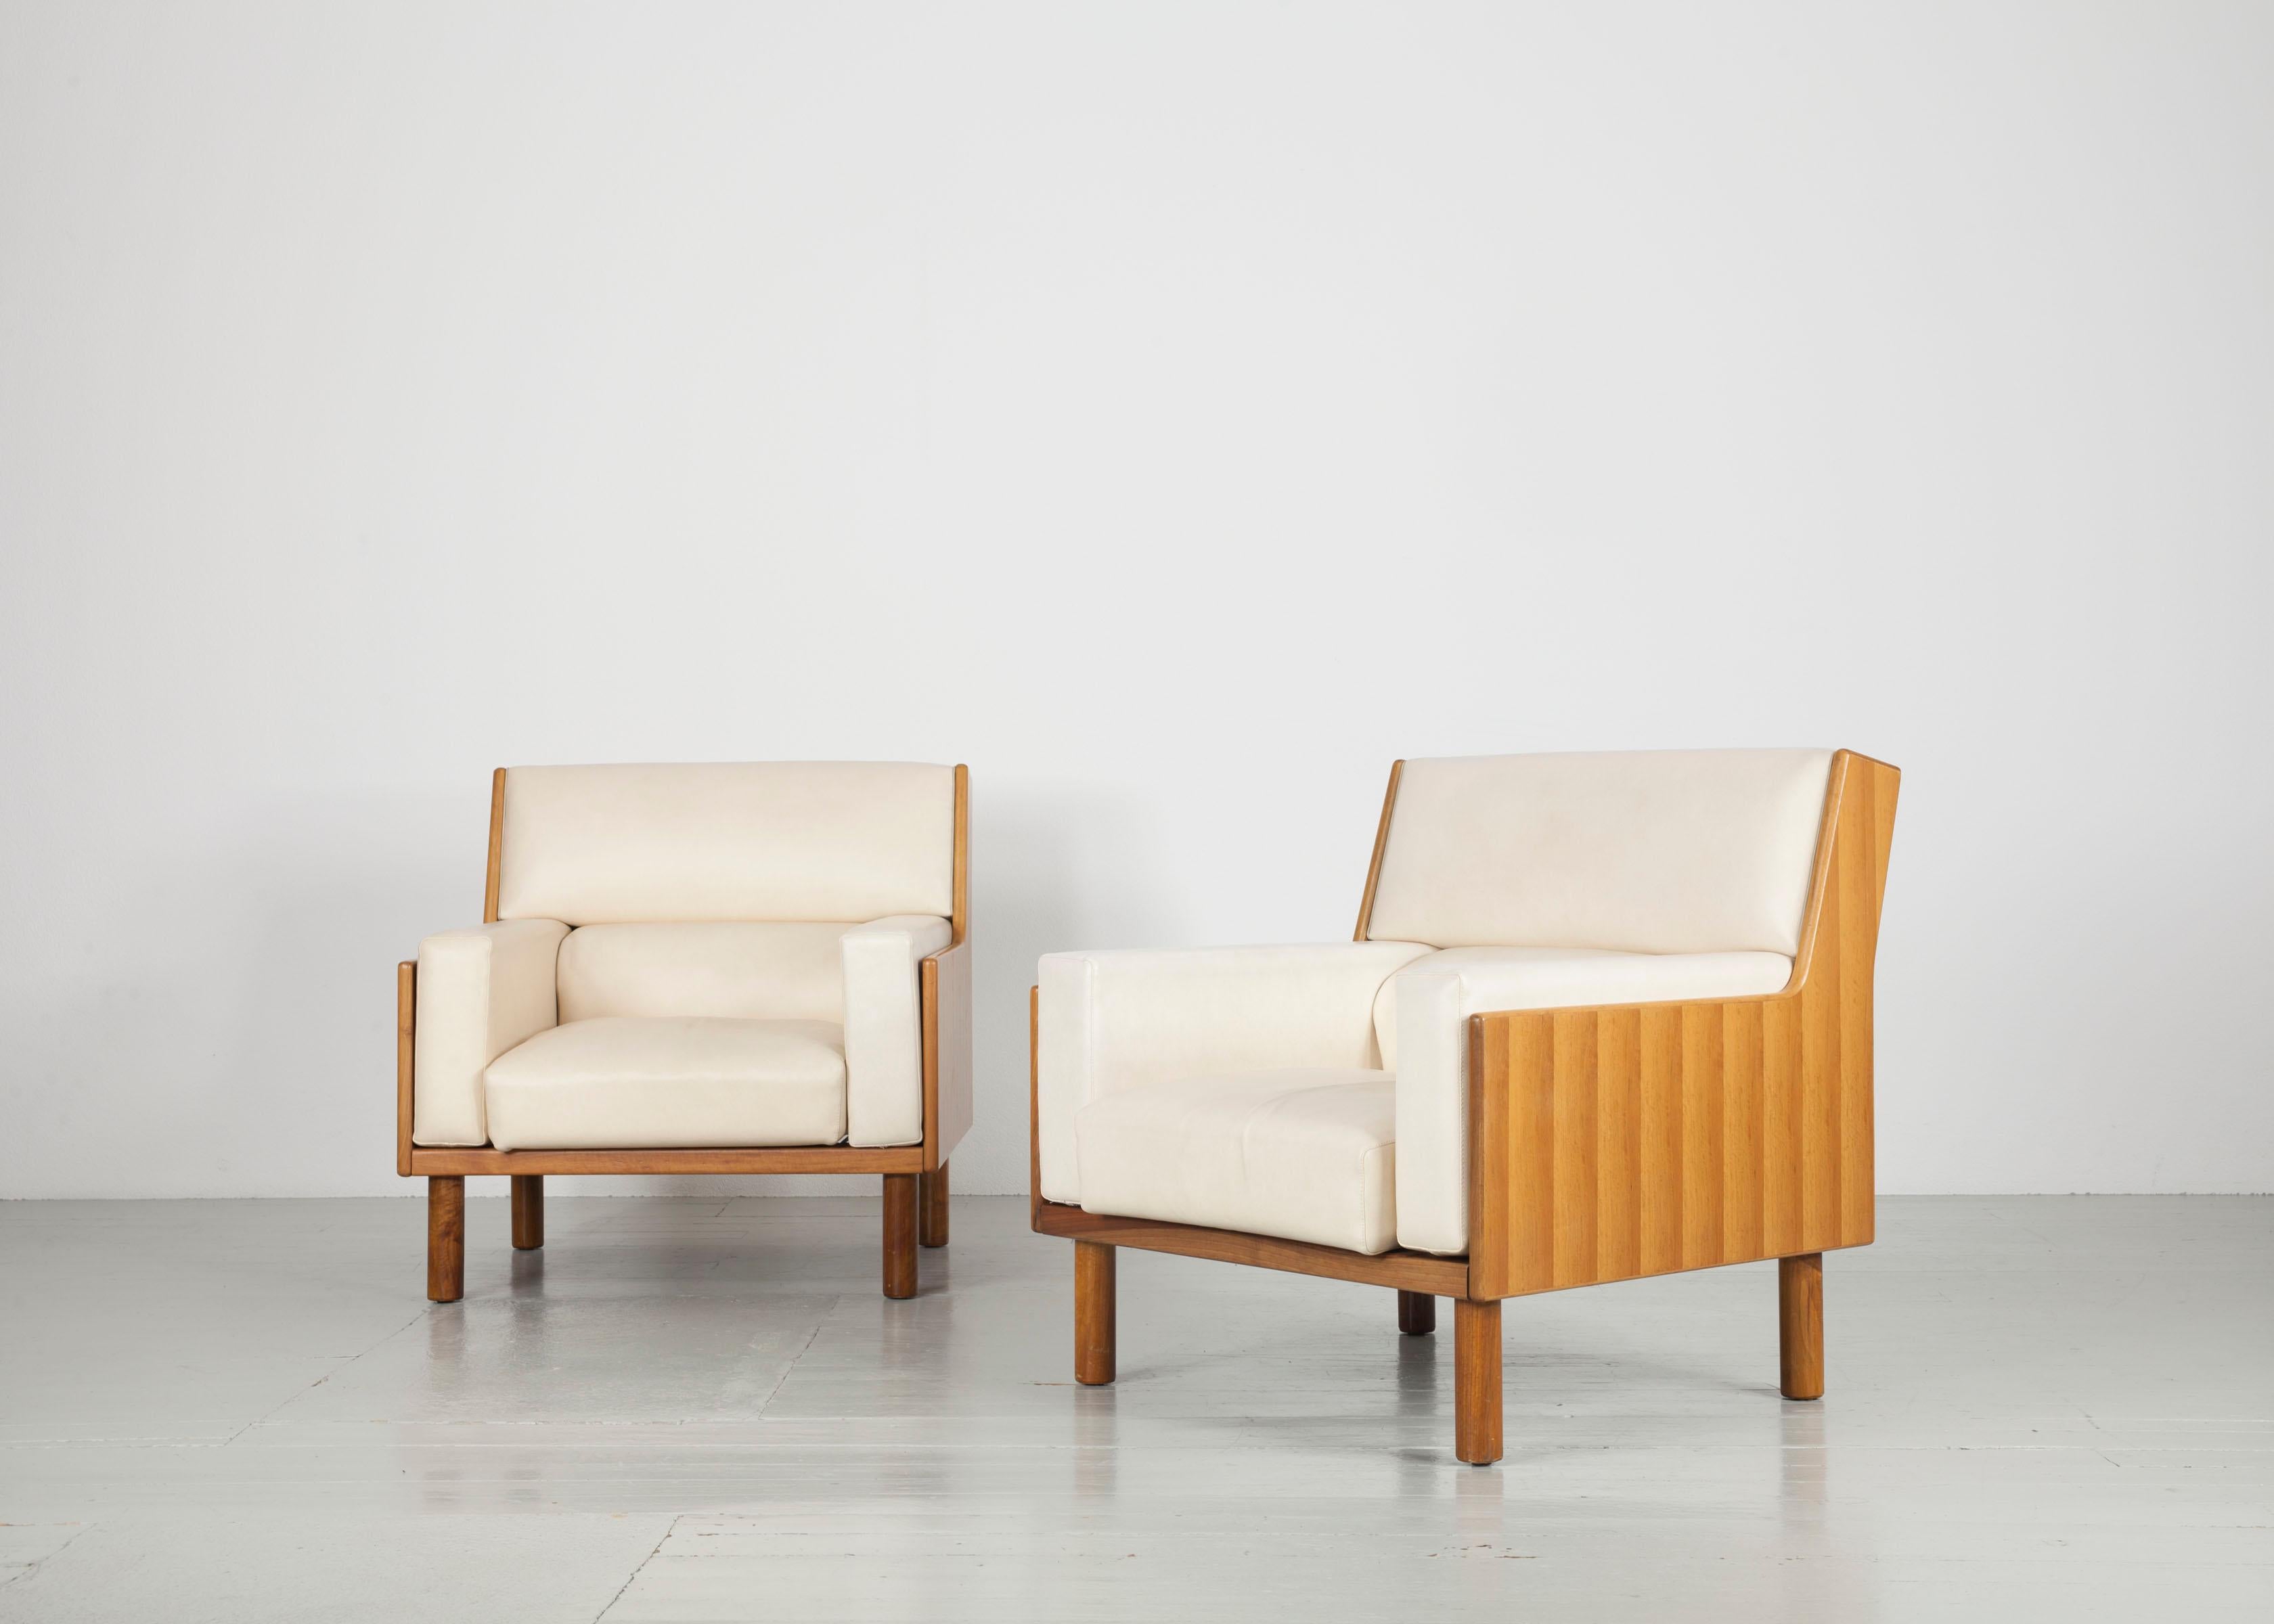 Set of 2 Armchairs and Couch, Manufactured by Anonima Castelli Bologna, 1950s For Sale 1